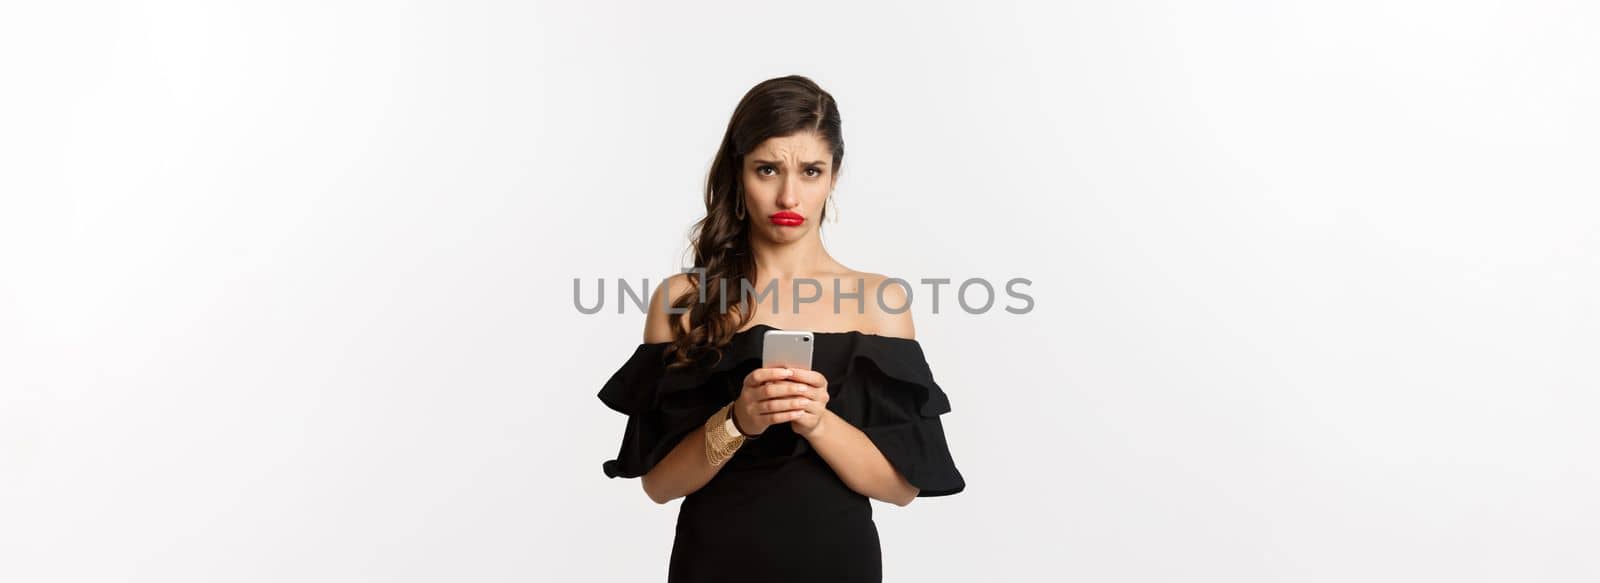 Sad and gloomy woman in black dress, sulking upset, using mobile phone and feeling disappointed, standing over white background.